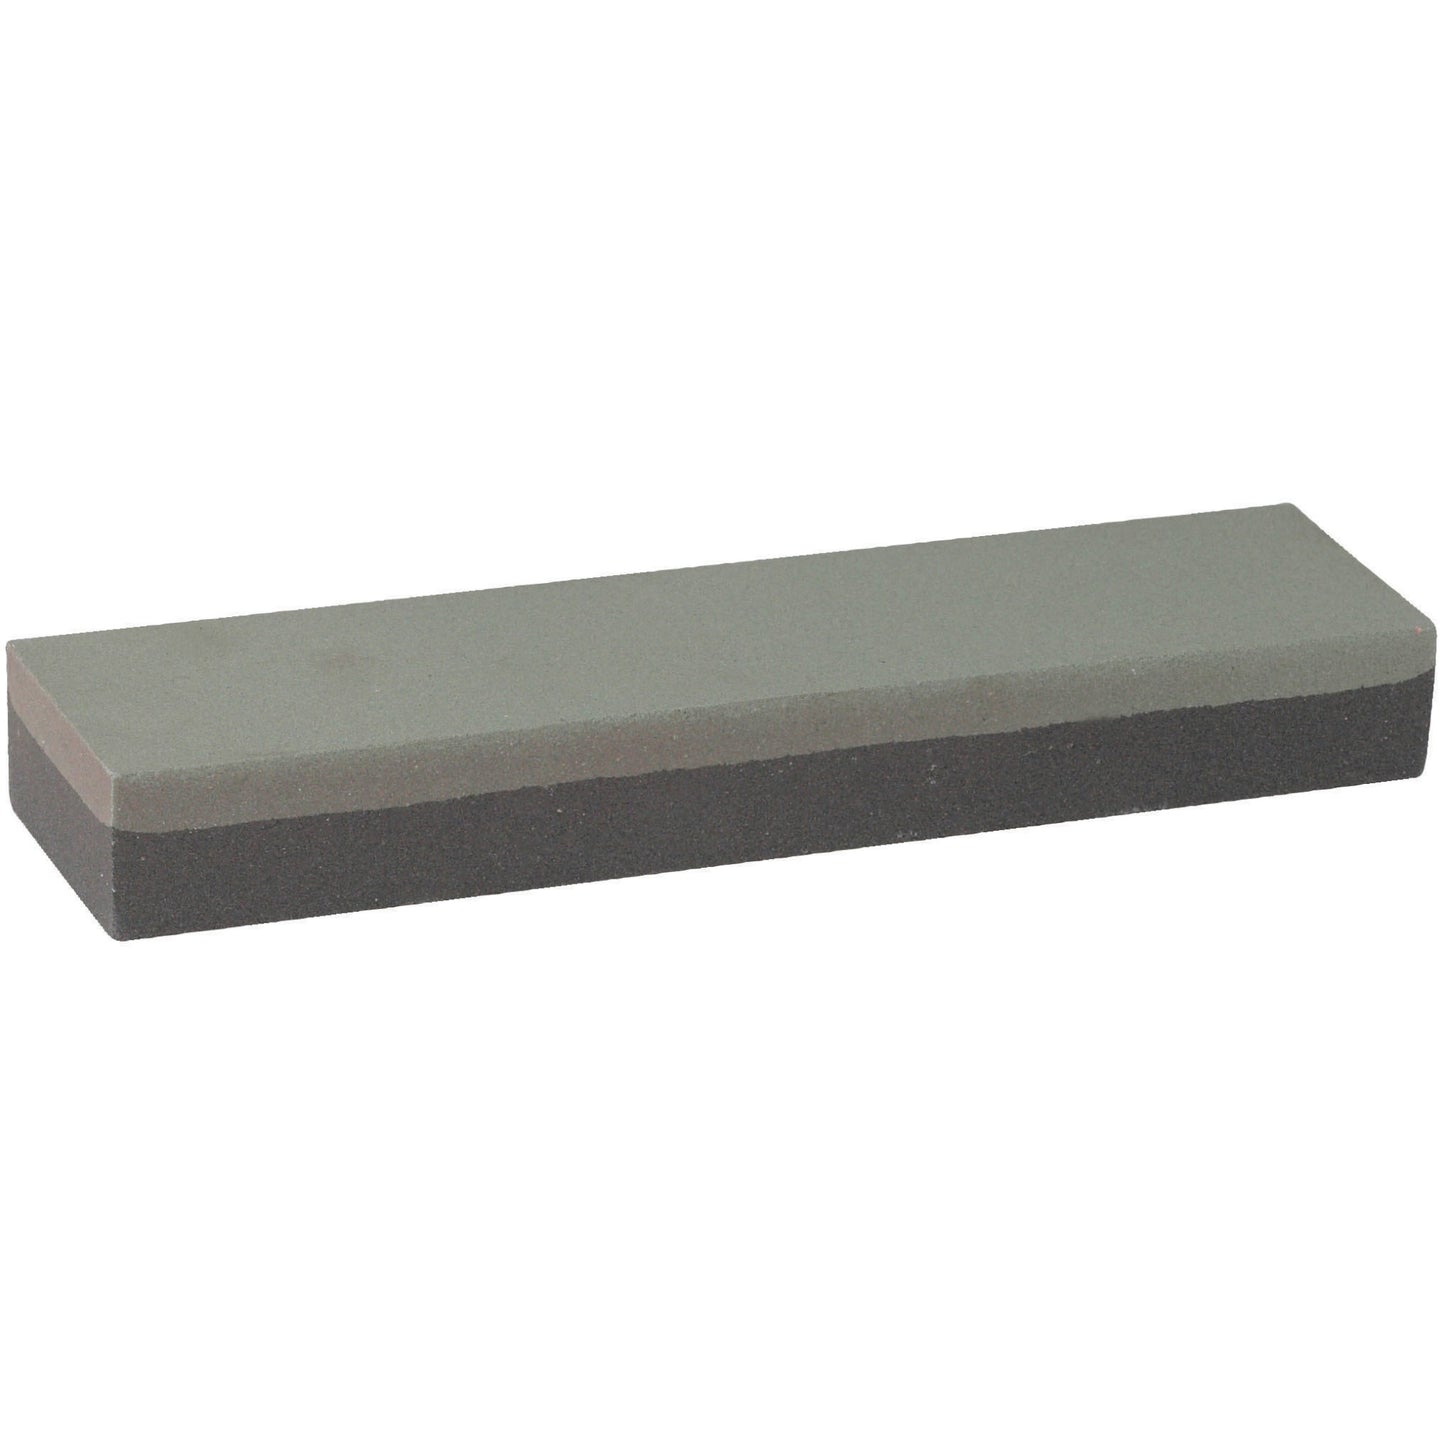 SS-821 - Combination Sharpening Stone  with Fine and Medium Grain - 8 x 2 x 1